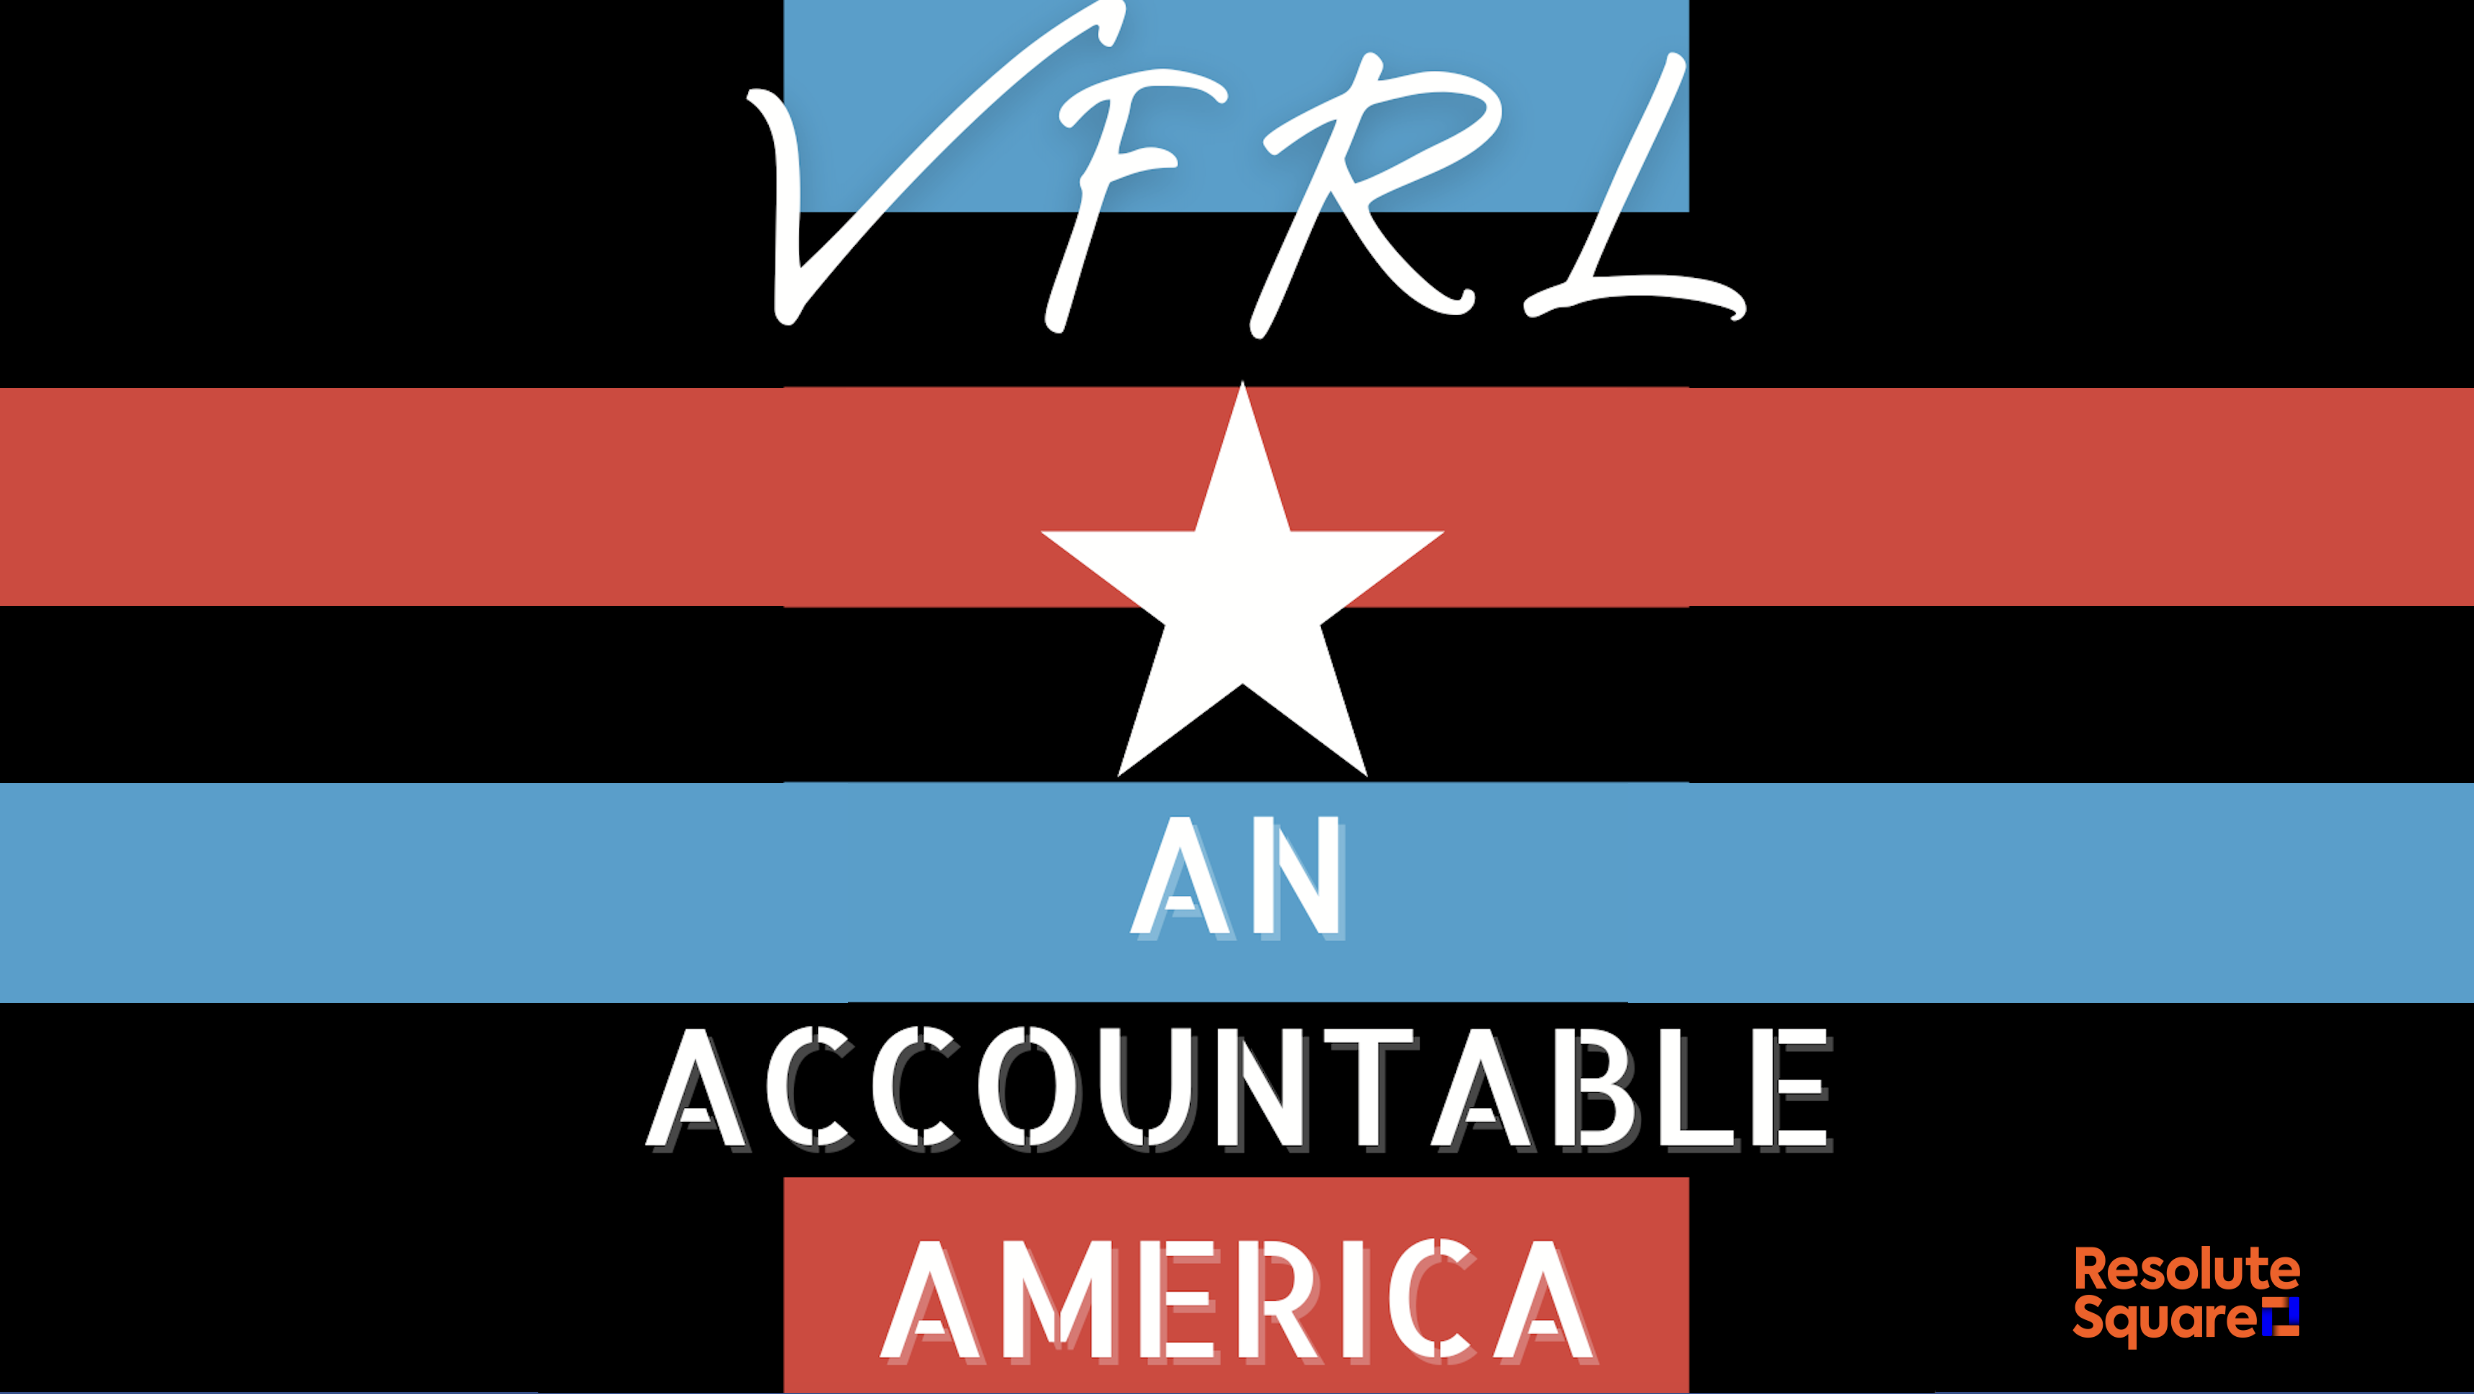 VFRL's An Accountable America Podcast